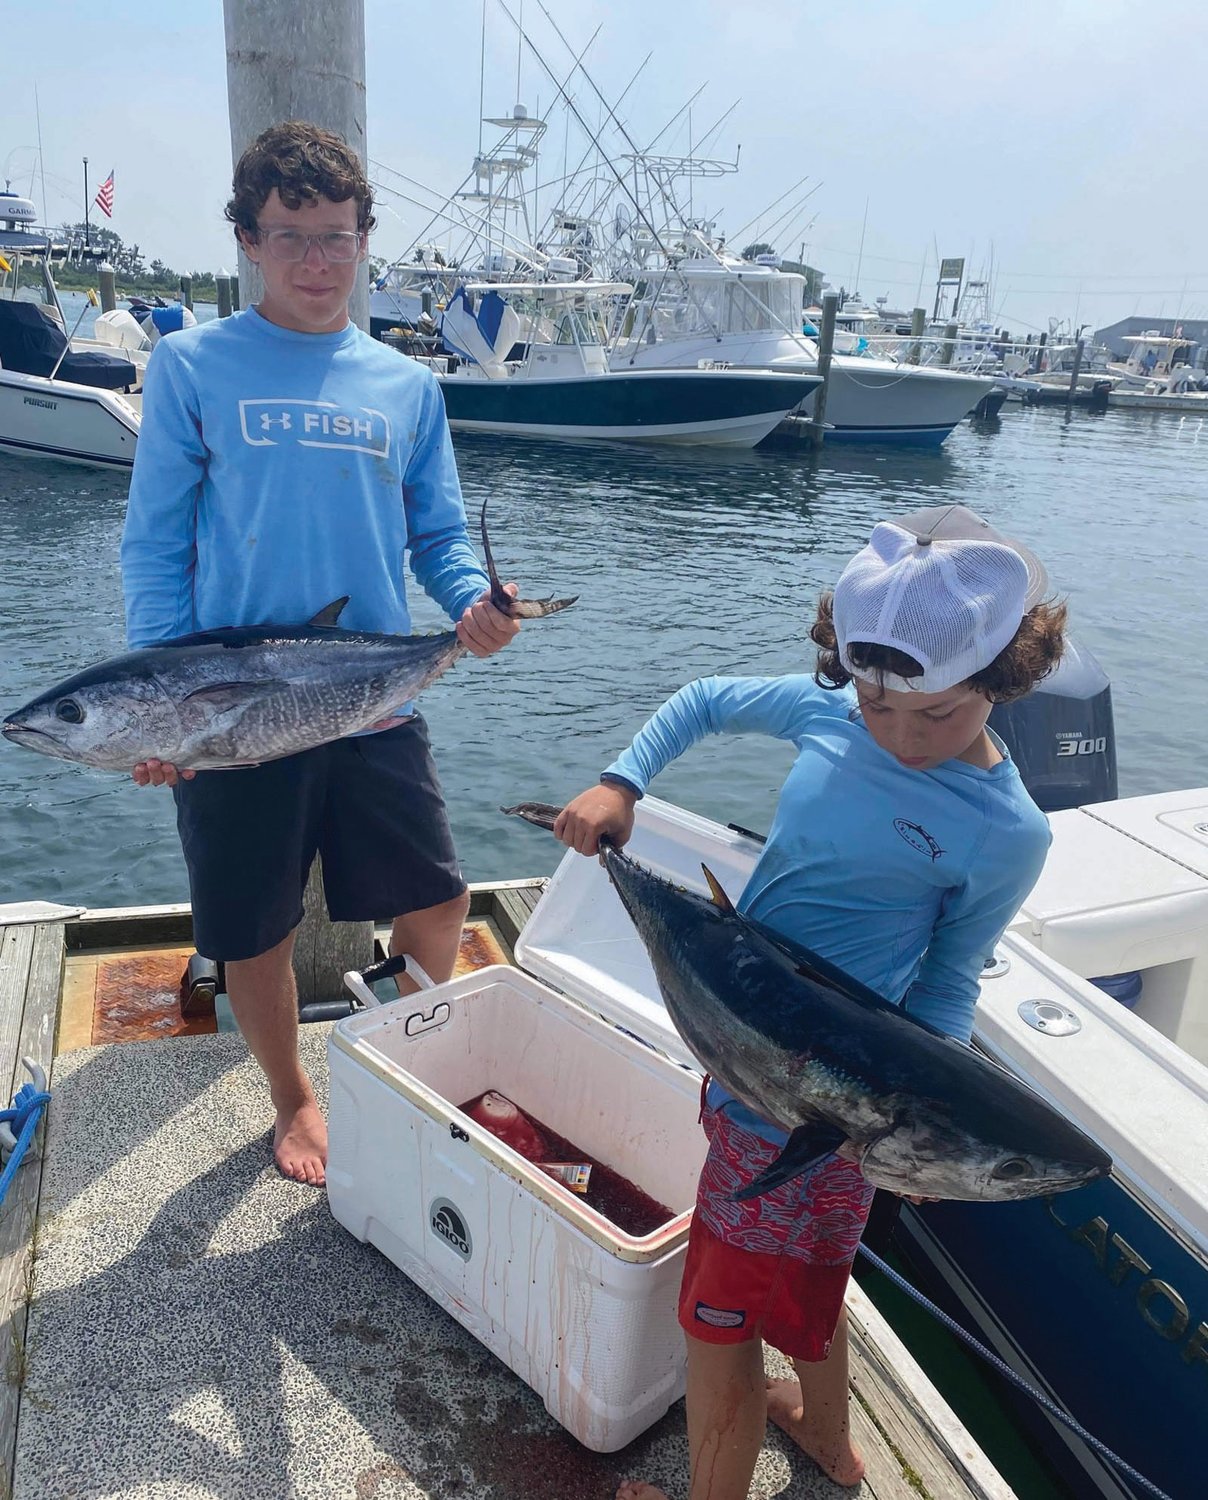 This weekend, five years later, the trio landed bluefin tuna. Rowan (now 11, on right in photos said, “I only want to fish for bluefin tuna for the rest of my life.”